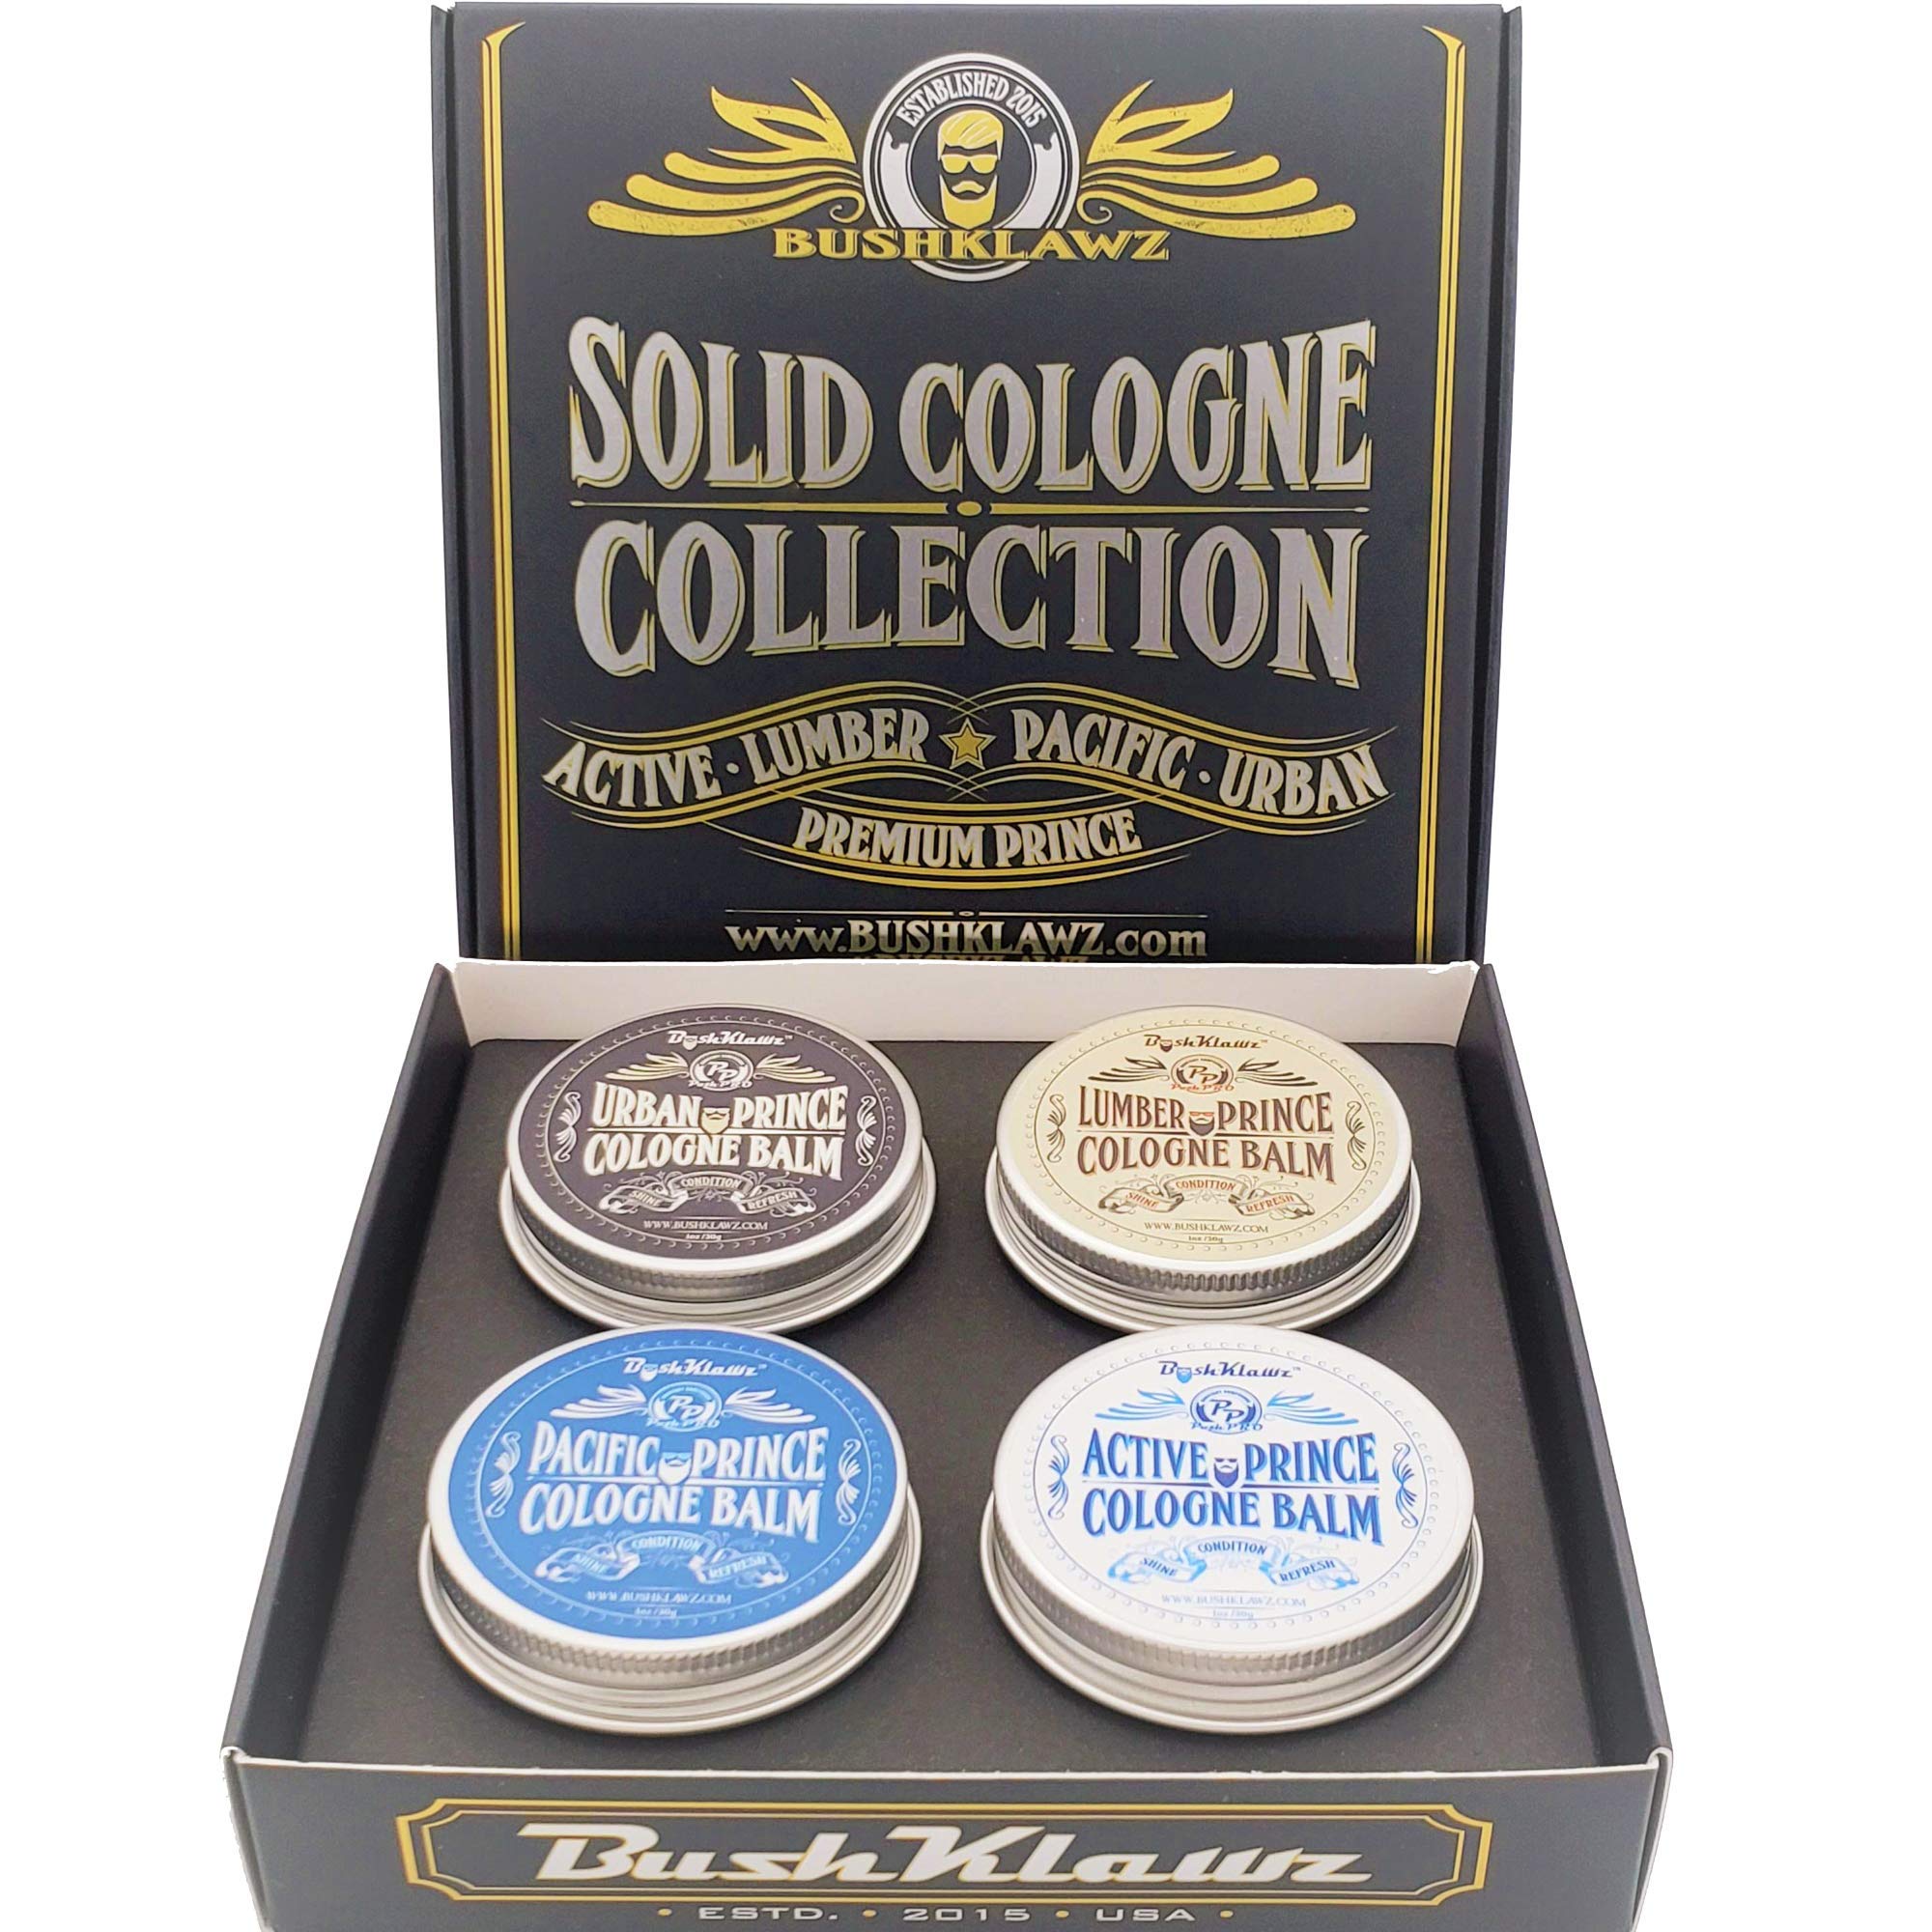 Premium Prince Solid Cologne 1 oz Variety Gift Set Alcohol Free Natural Concentrated Full Size Travel Friendly Tins Men's Fragrance 4 Manly Scents to Satisfy all Types of Viking Cannon Black Prime